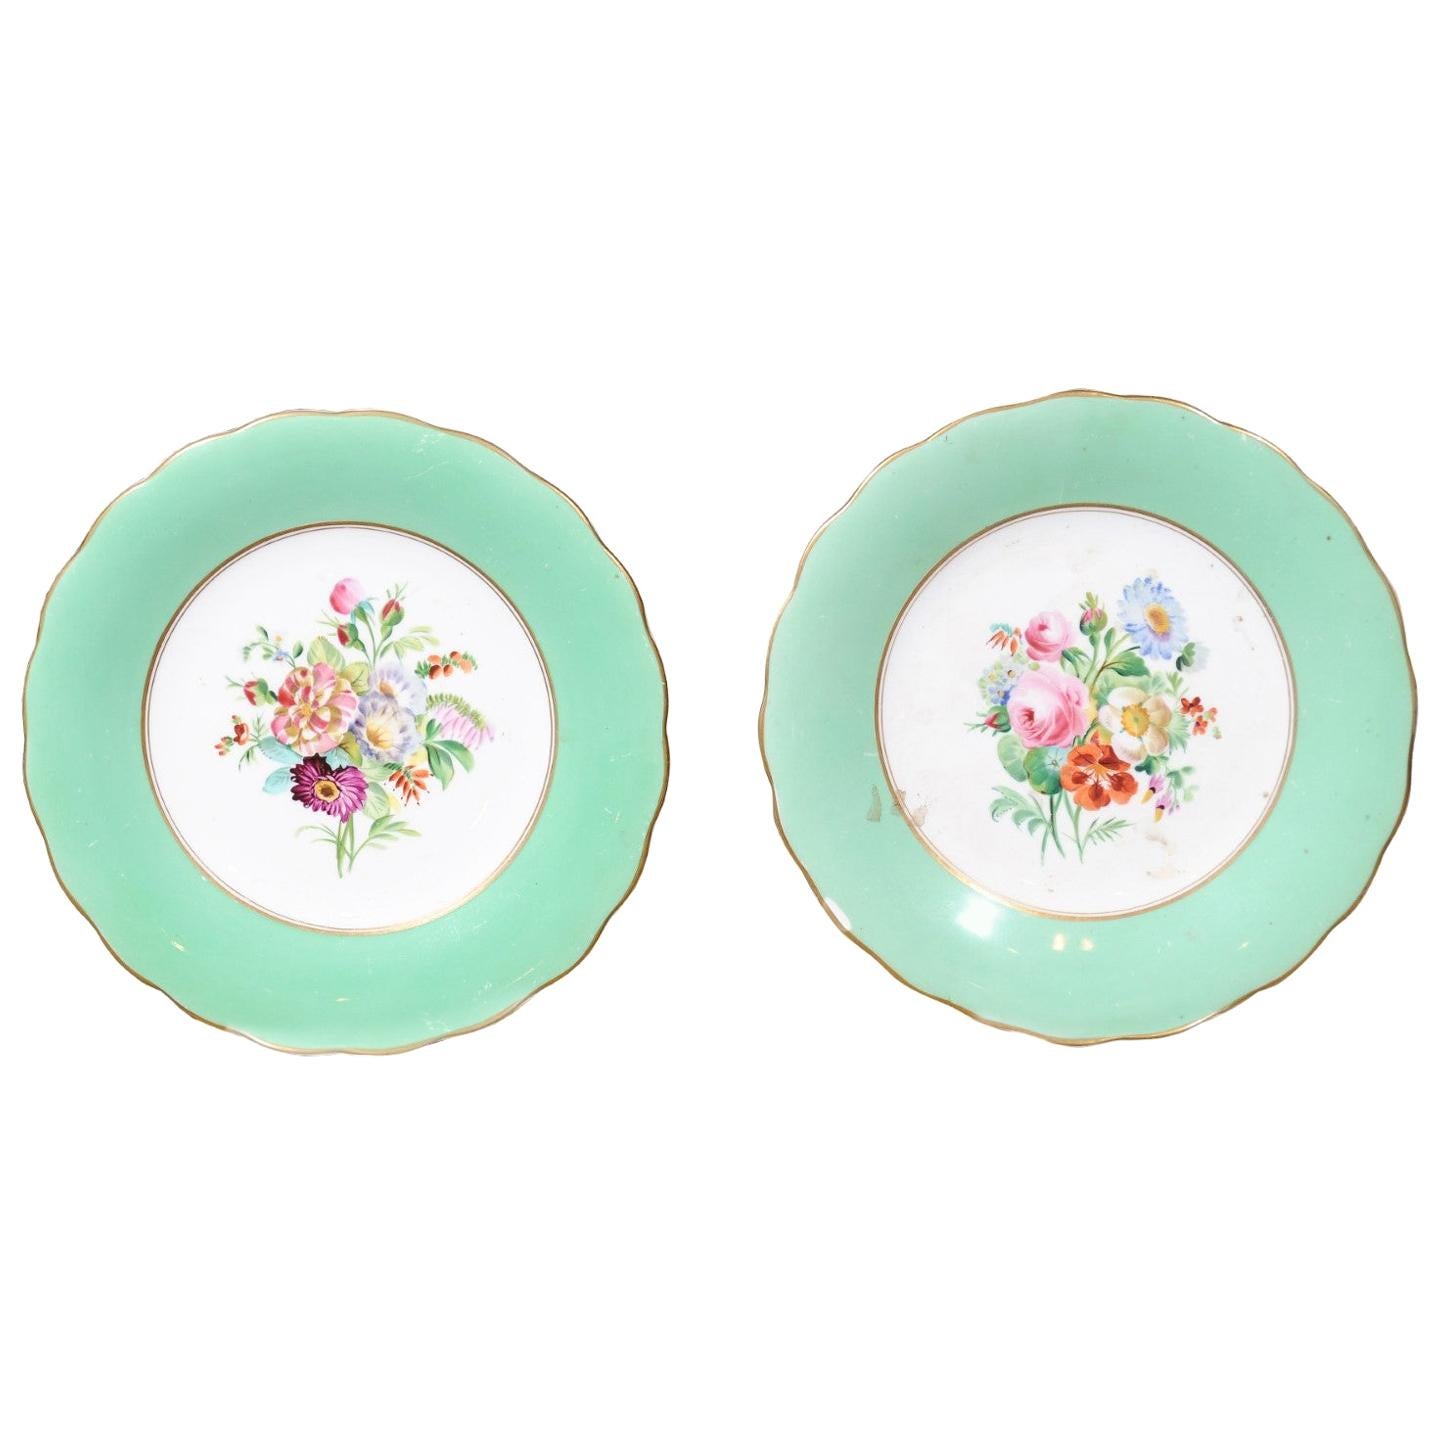 English Late 19th Century Plates with Colorful Floral Décor, Green and Gold Trim